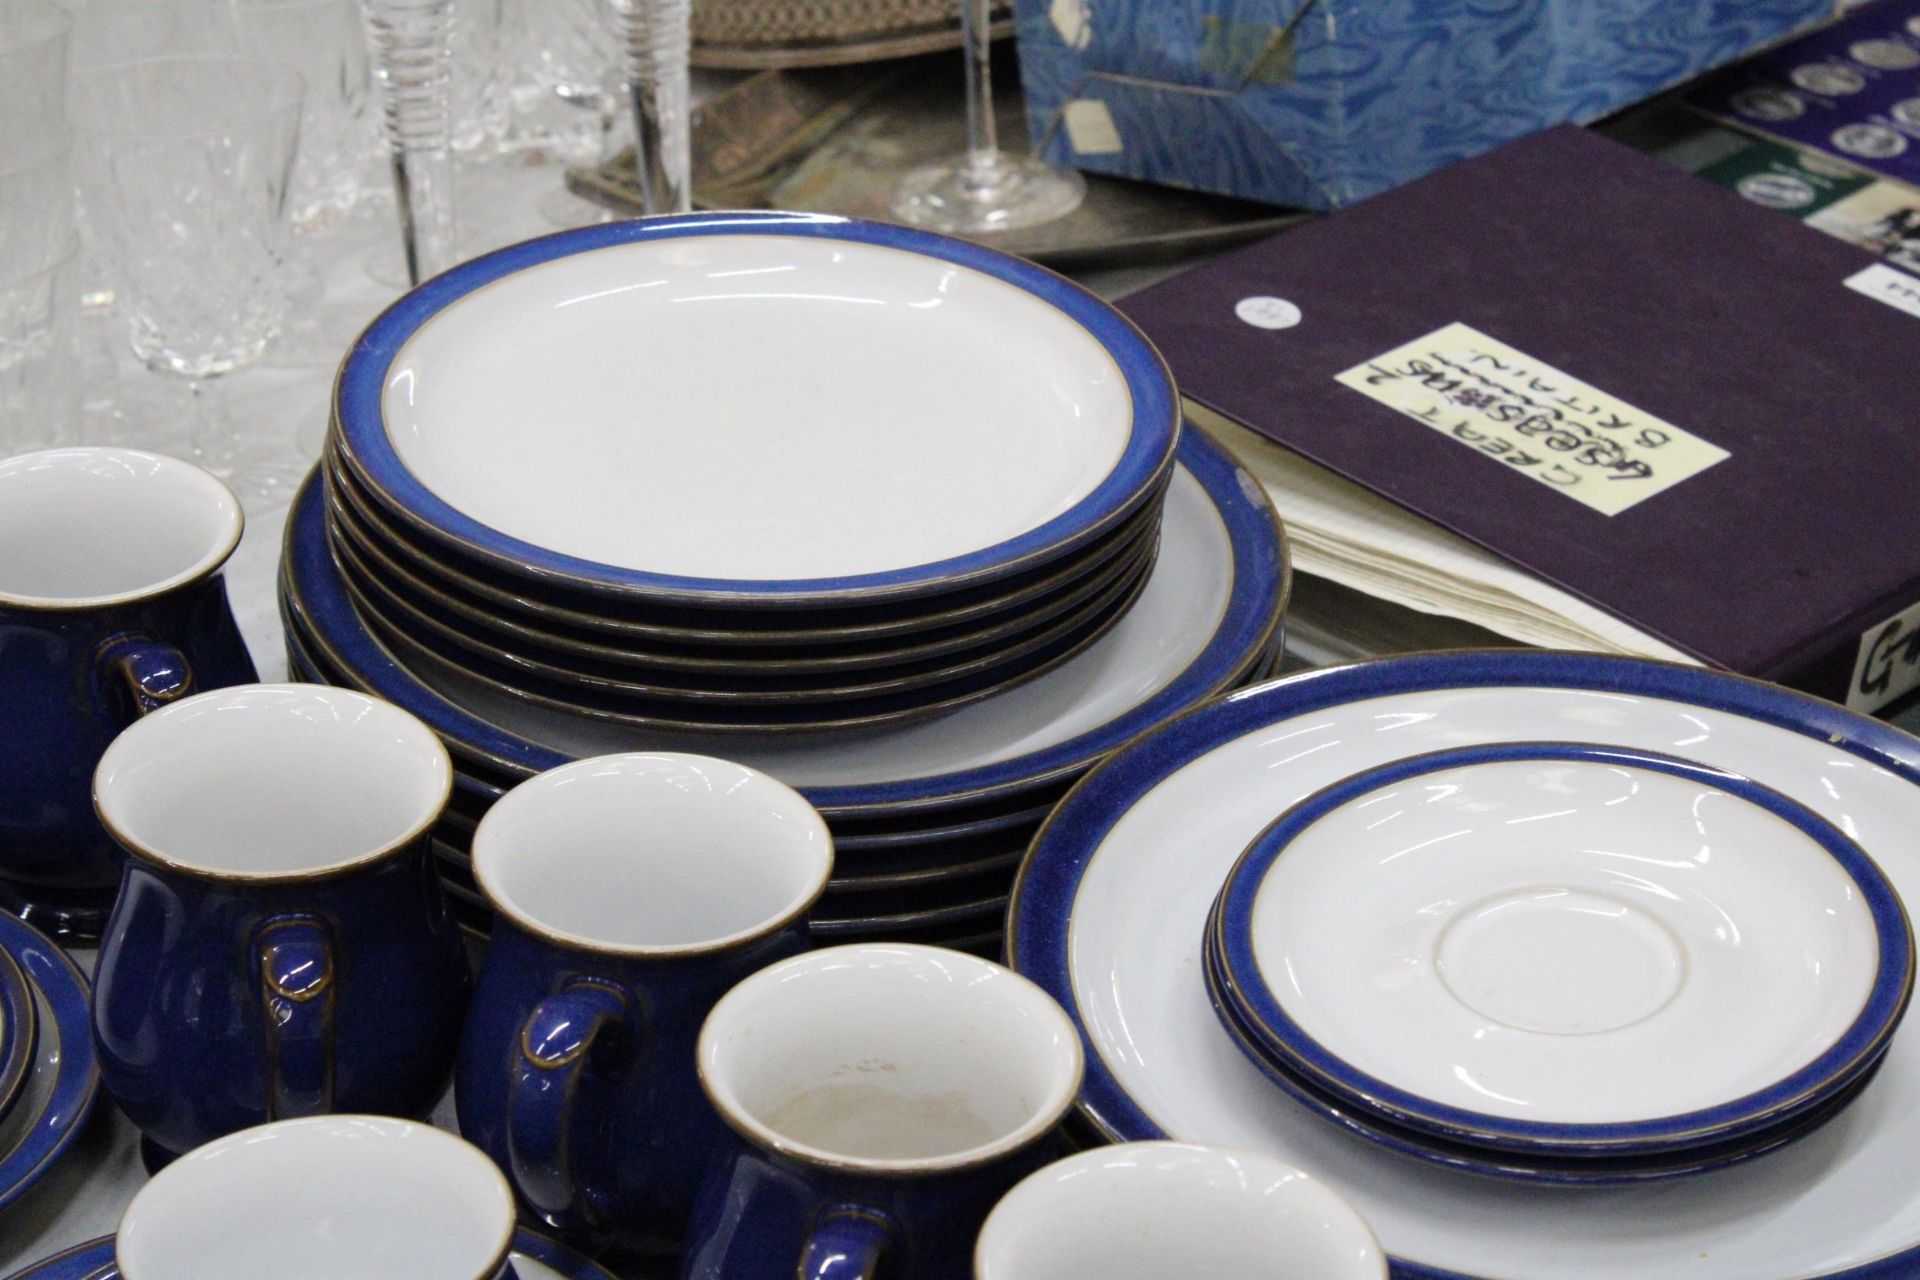 A DENBY COBALT BLUE DINNER SERVICE TO INCLUDE VARIOUS SIZES OF PLATES, BOWLS, A LARGE JUG, SUGAR - Image 5 of 5